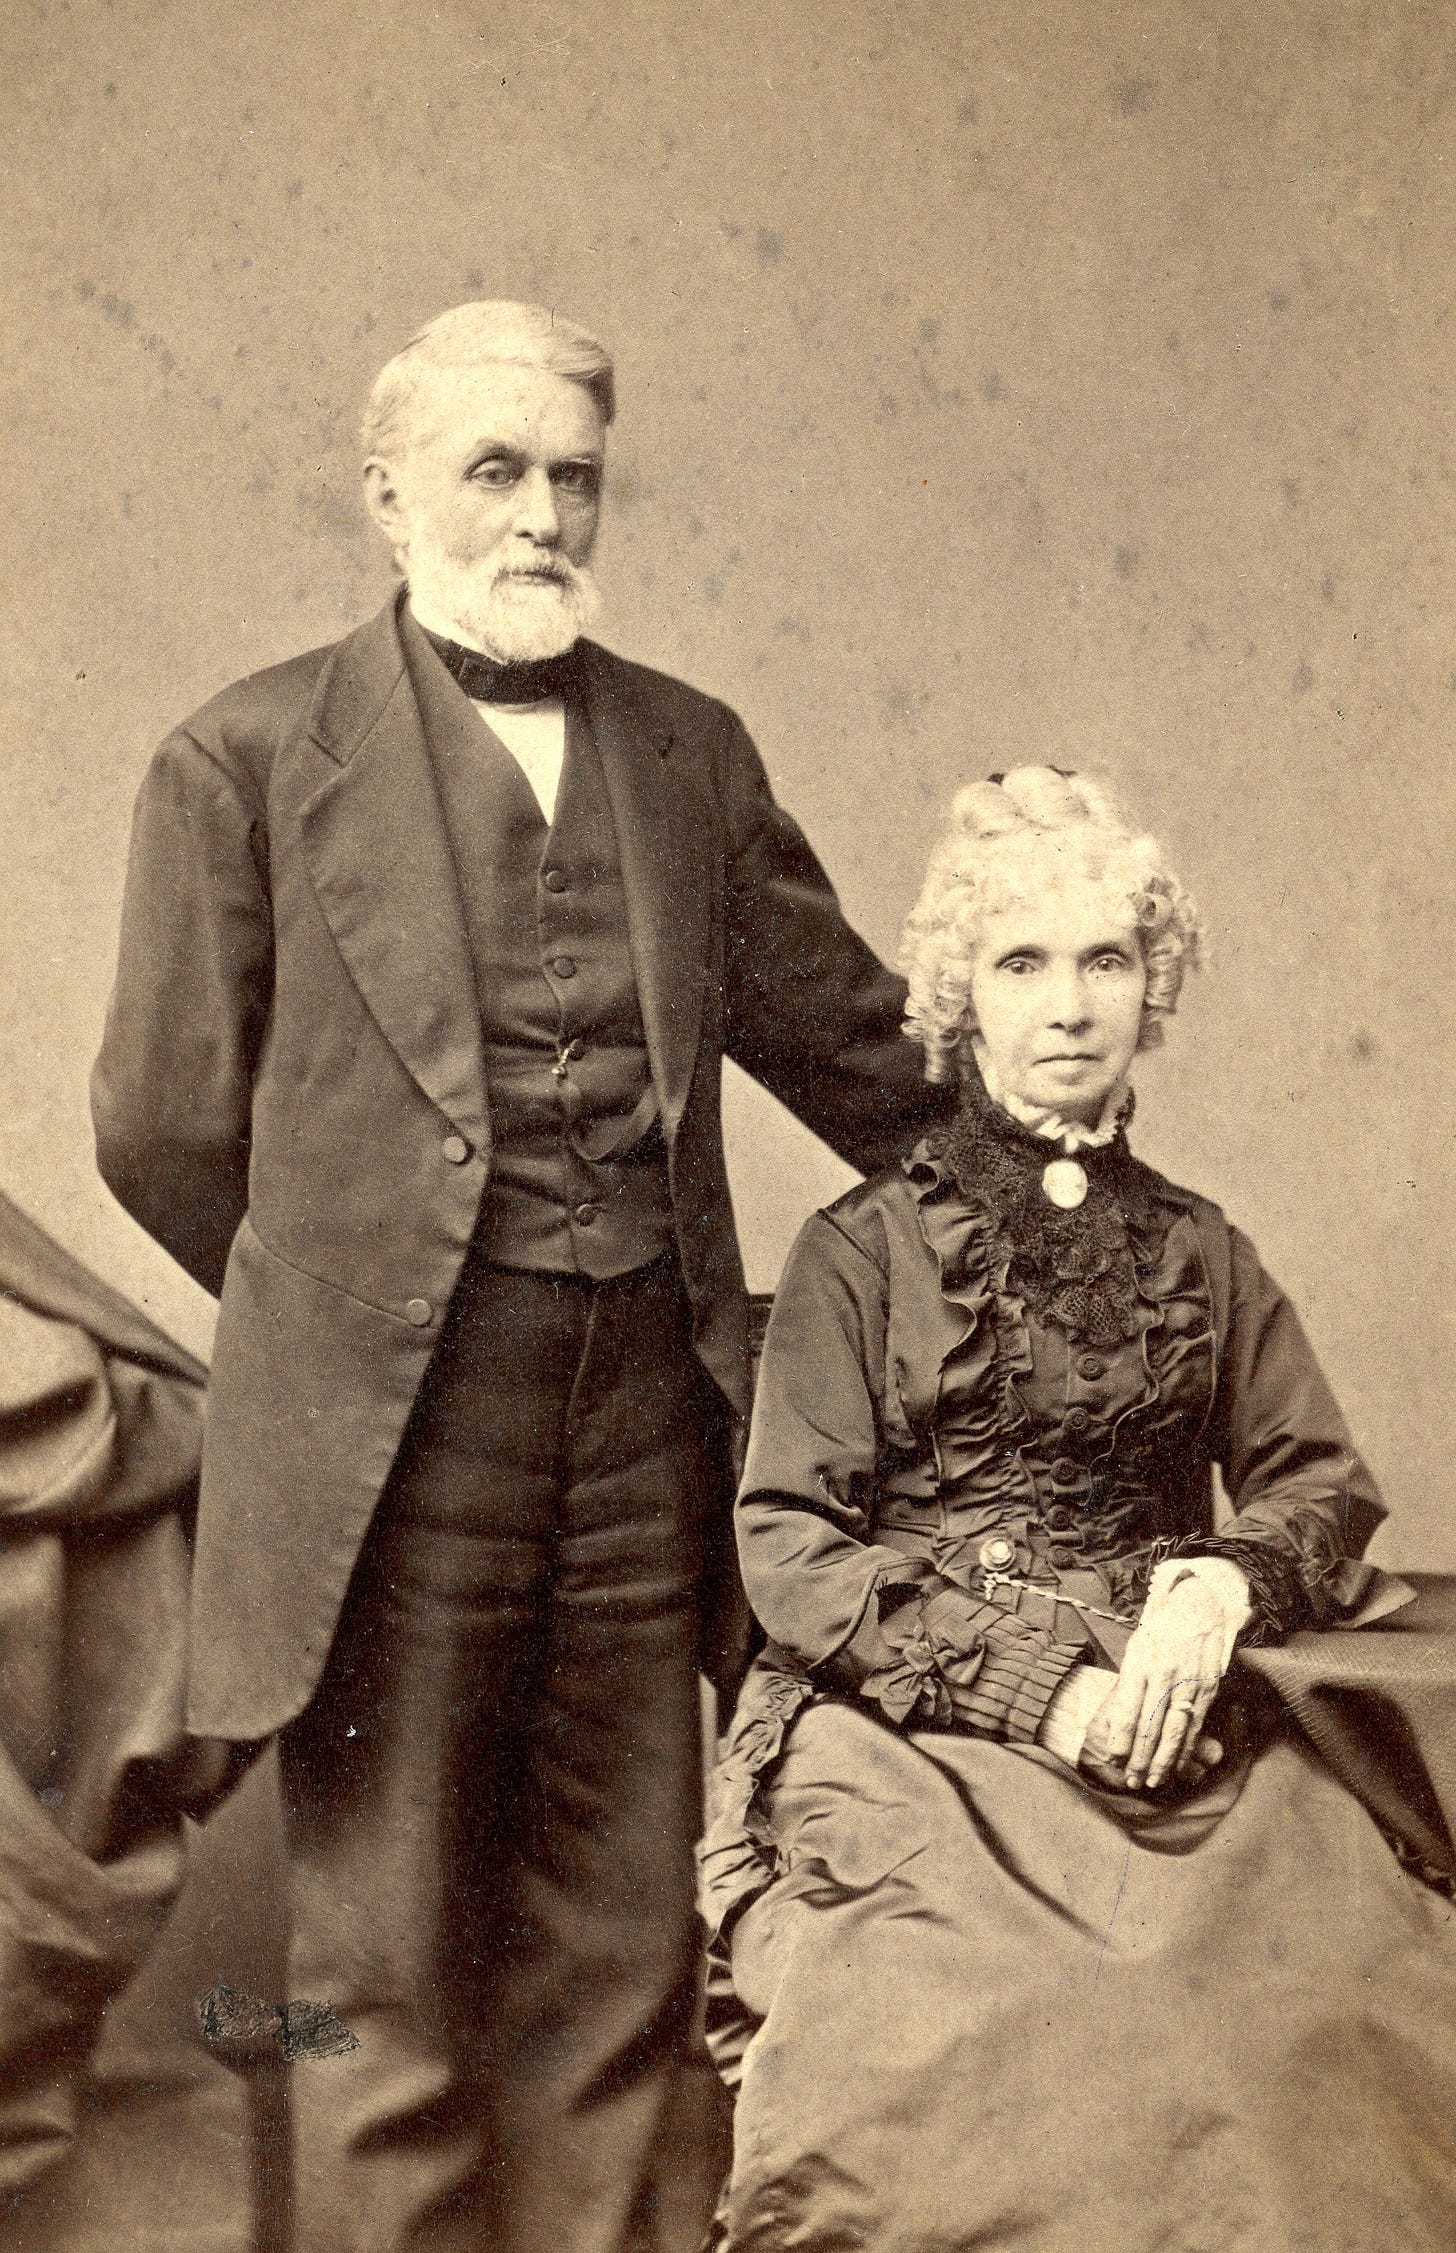 Portrait of man and woman from NIHS